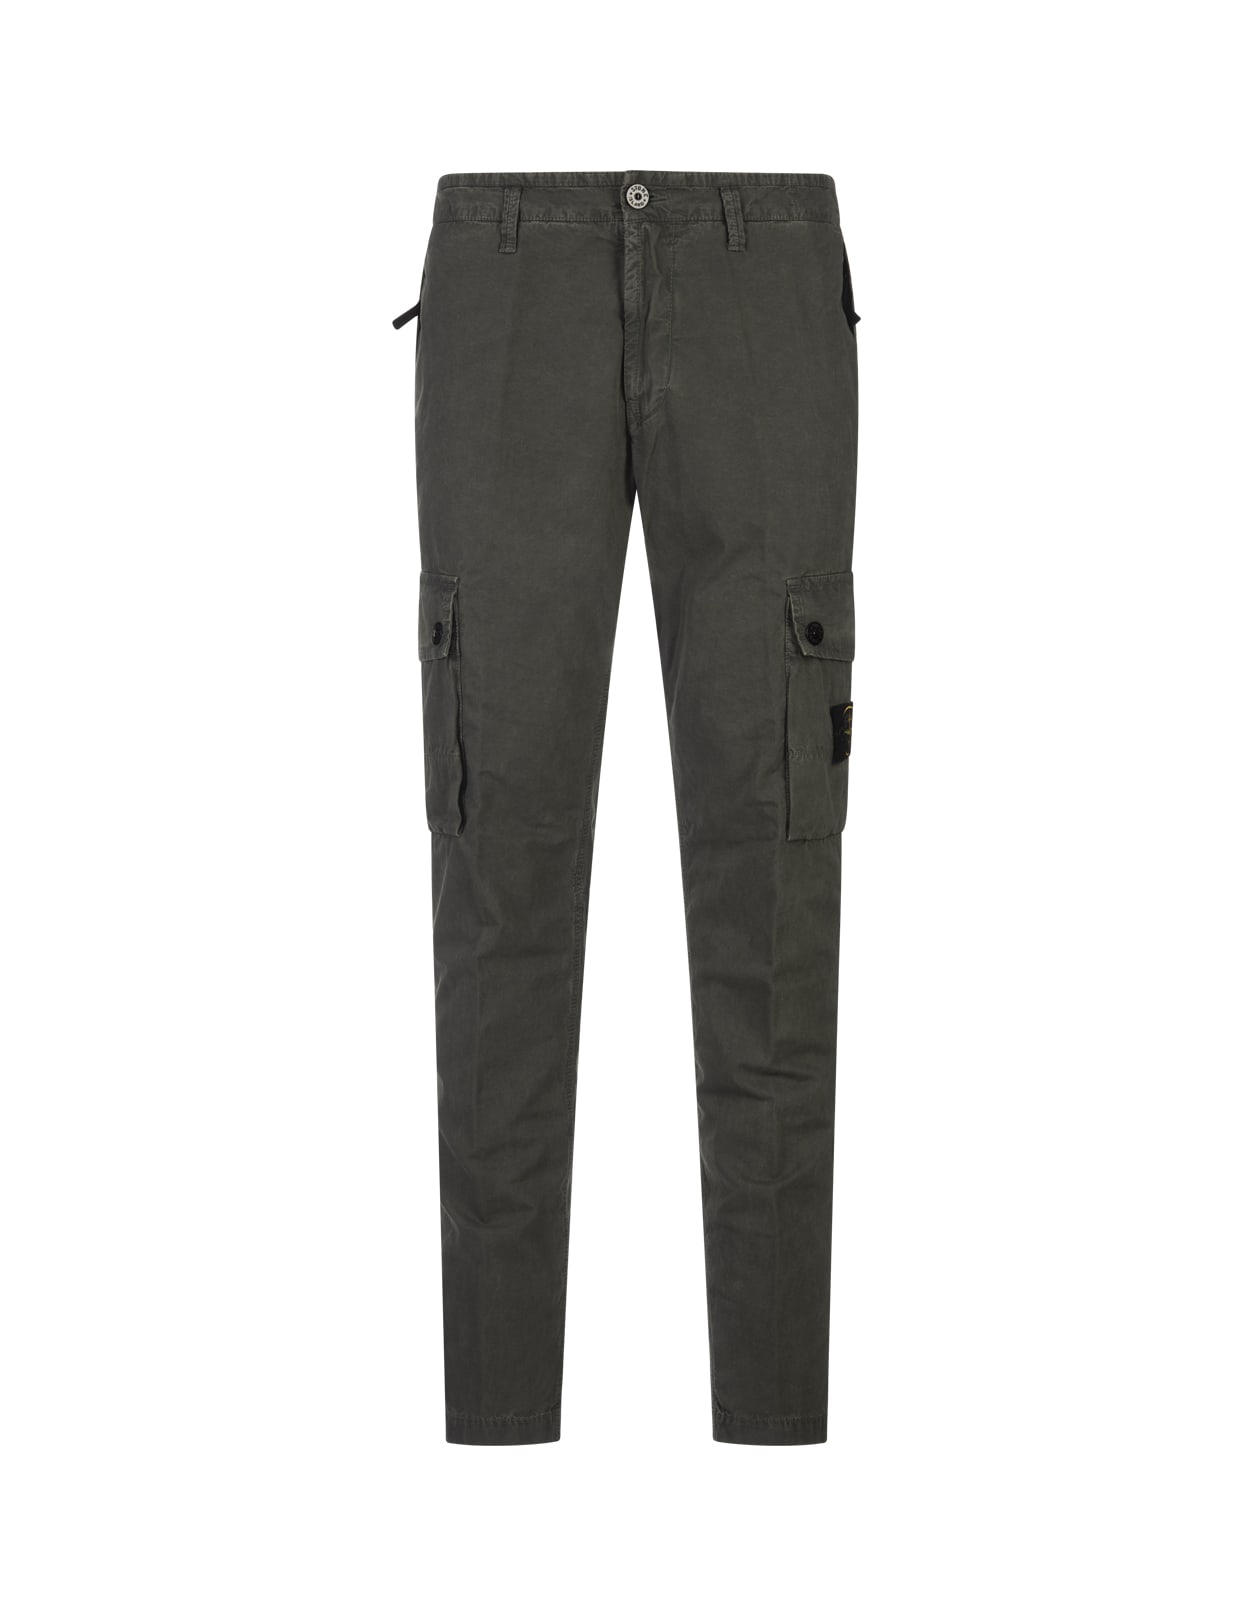 Green Cargo Trousers With old Effect